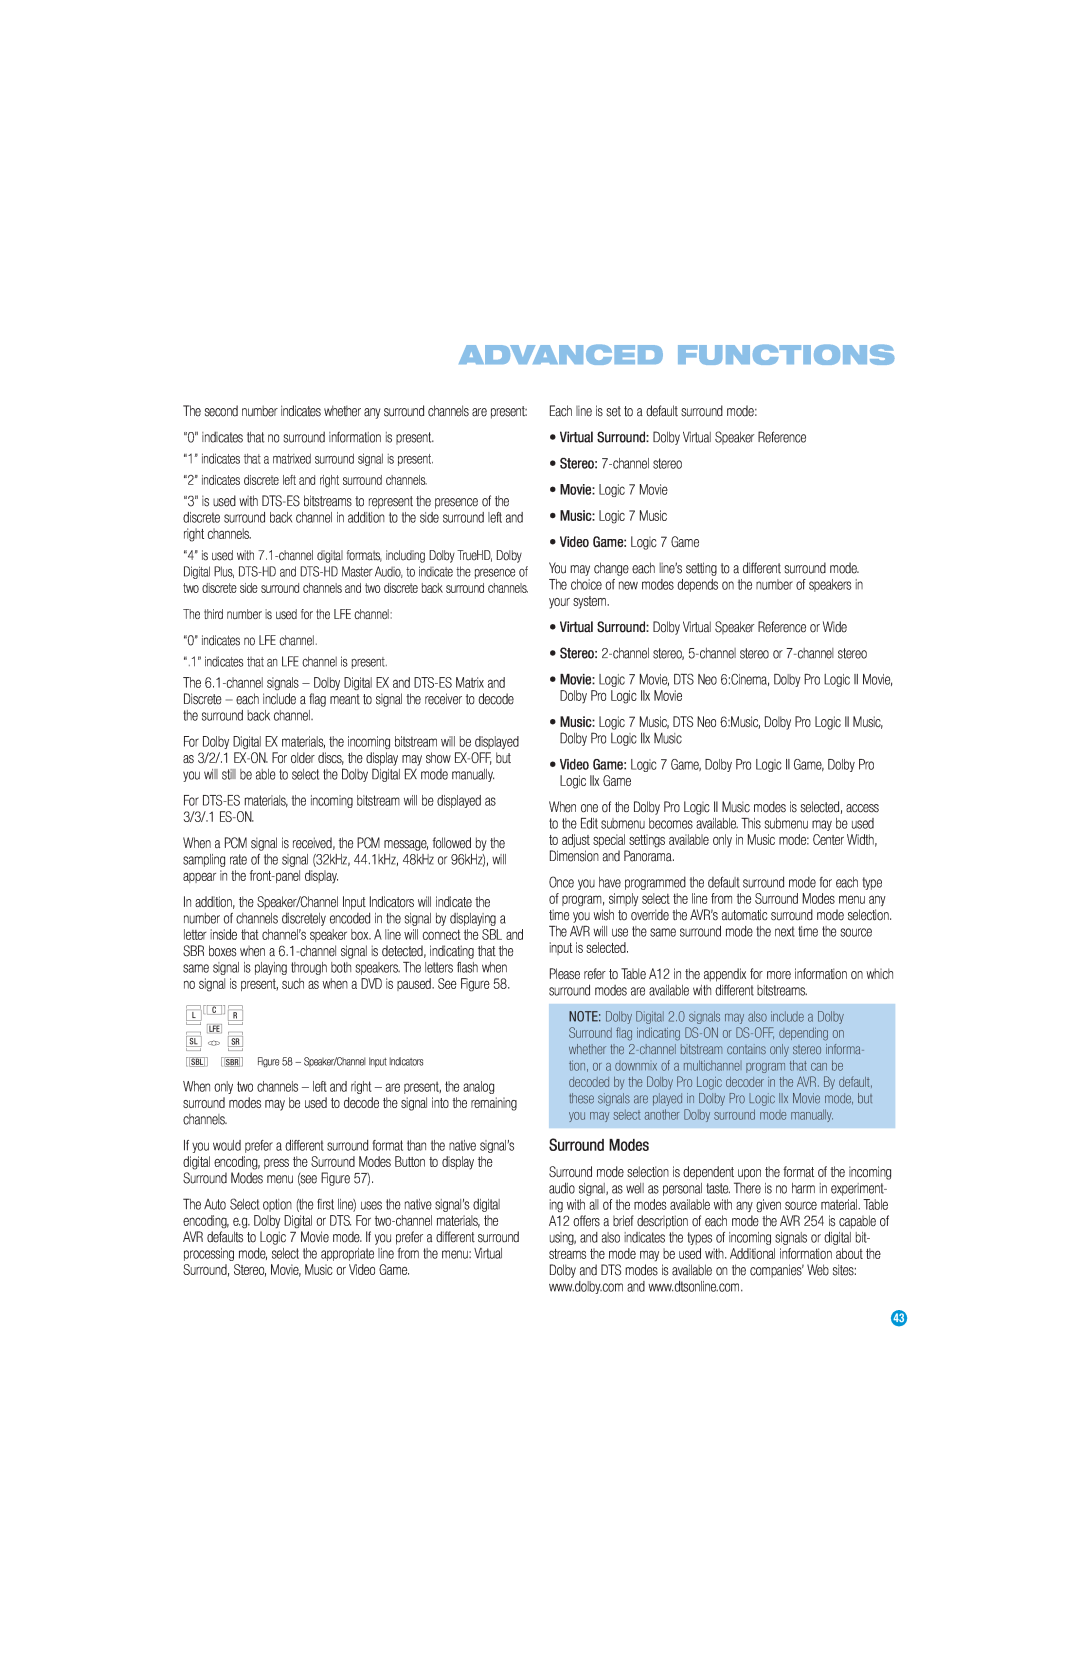 Harman-Kardon AVR 254 owner manual Advanced Functions, Surround Modes, Each line is set to a default surround mode 